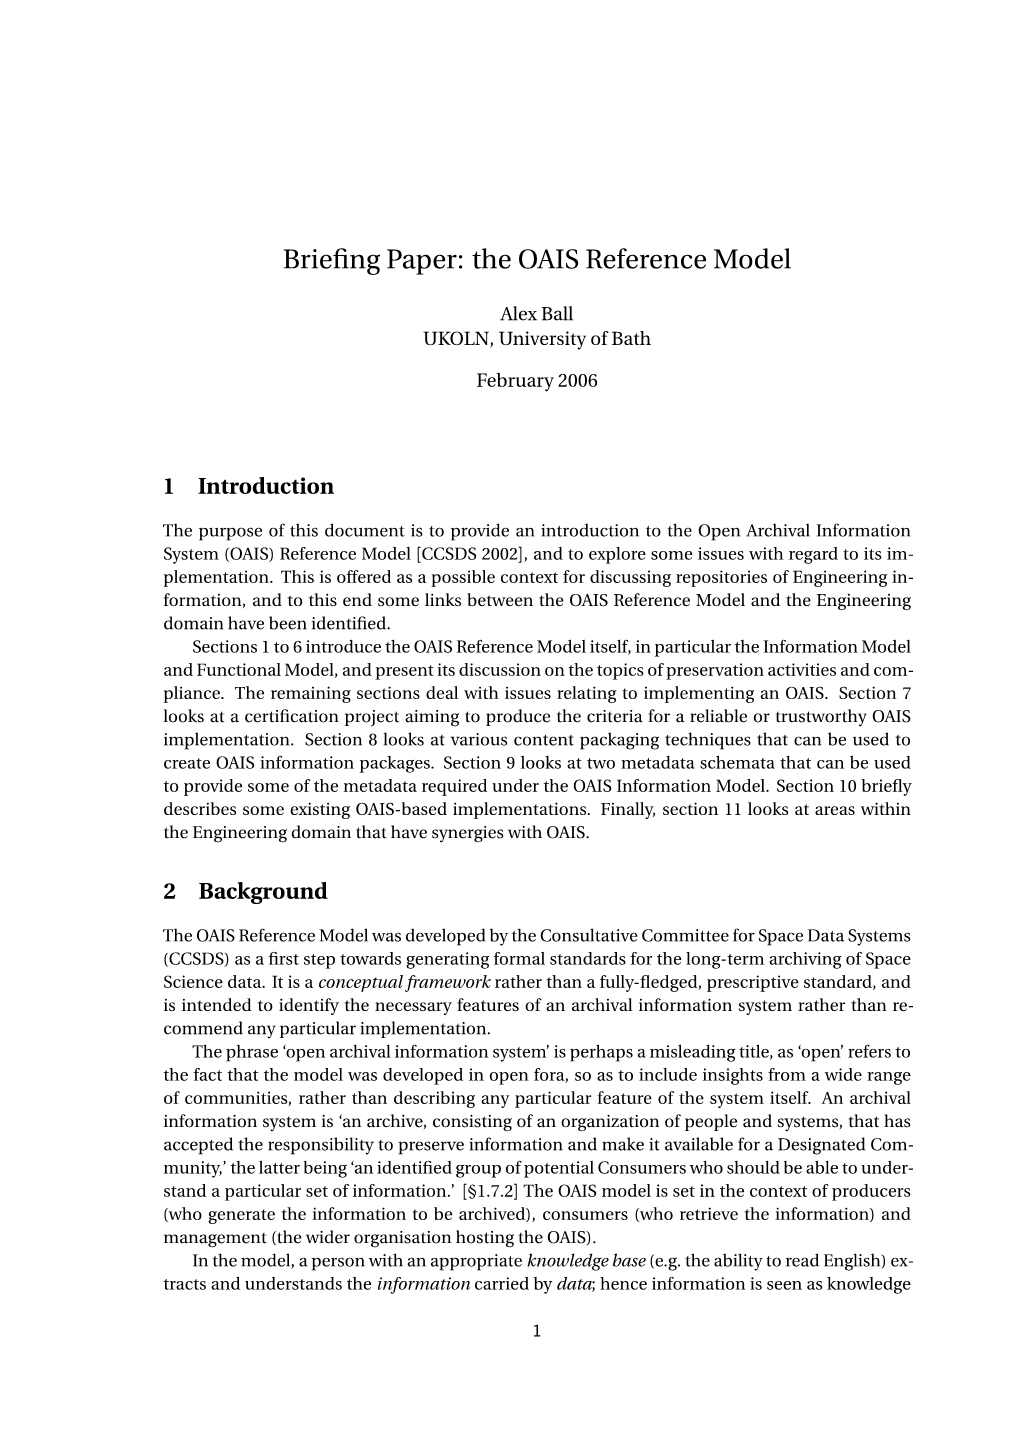 The OAIS Reference Model